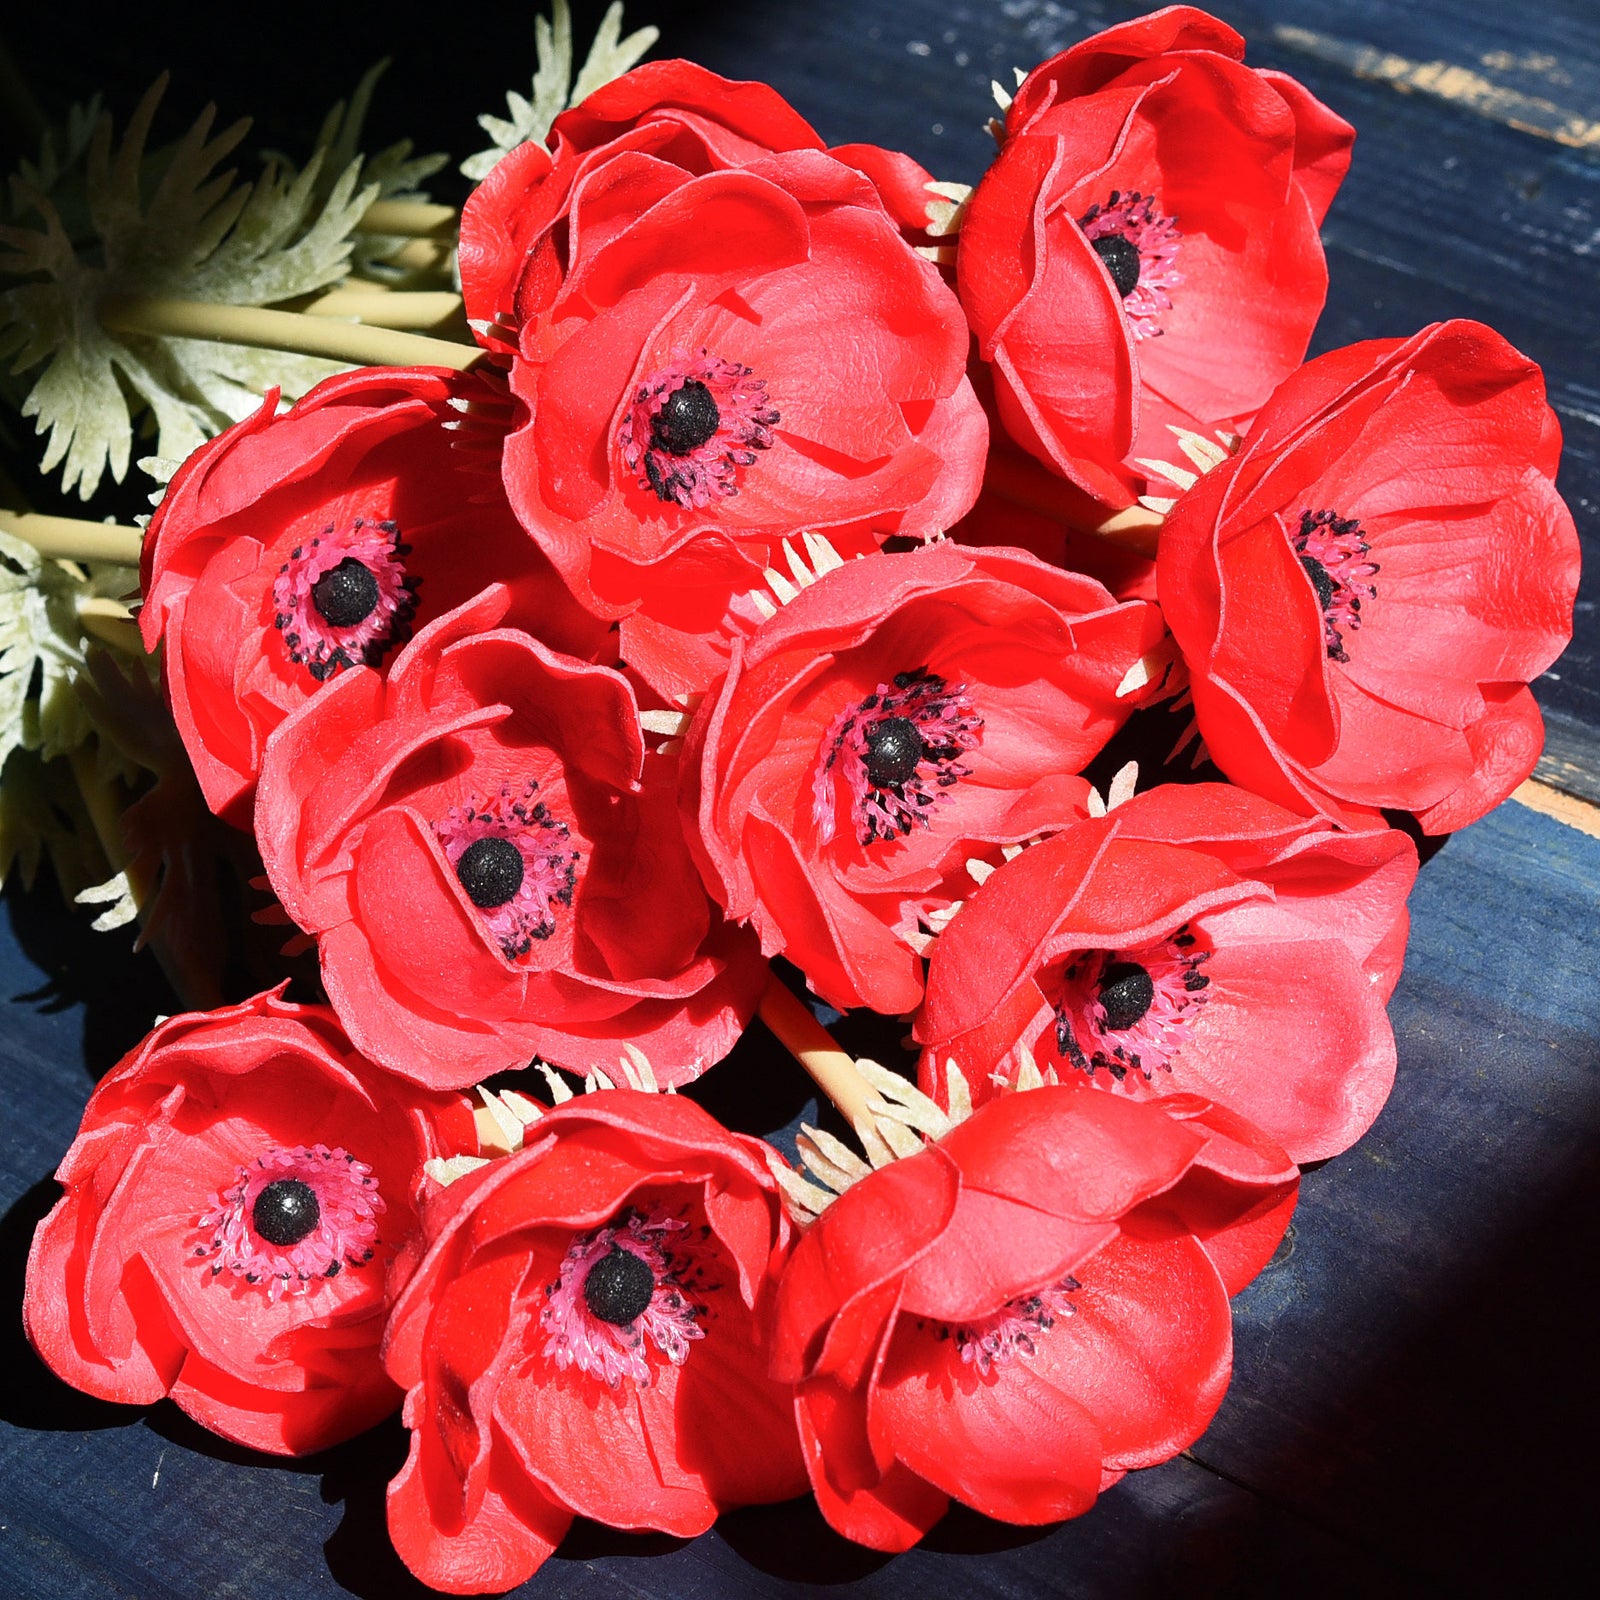 12 Long Stems of ‘Real Touch’ Artificial (Red) Anemone Flowers, Wedding Bouquet Flower Arrangement, 45cm (17.7 inches)